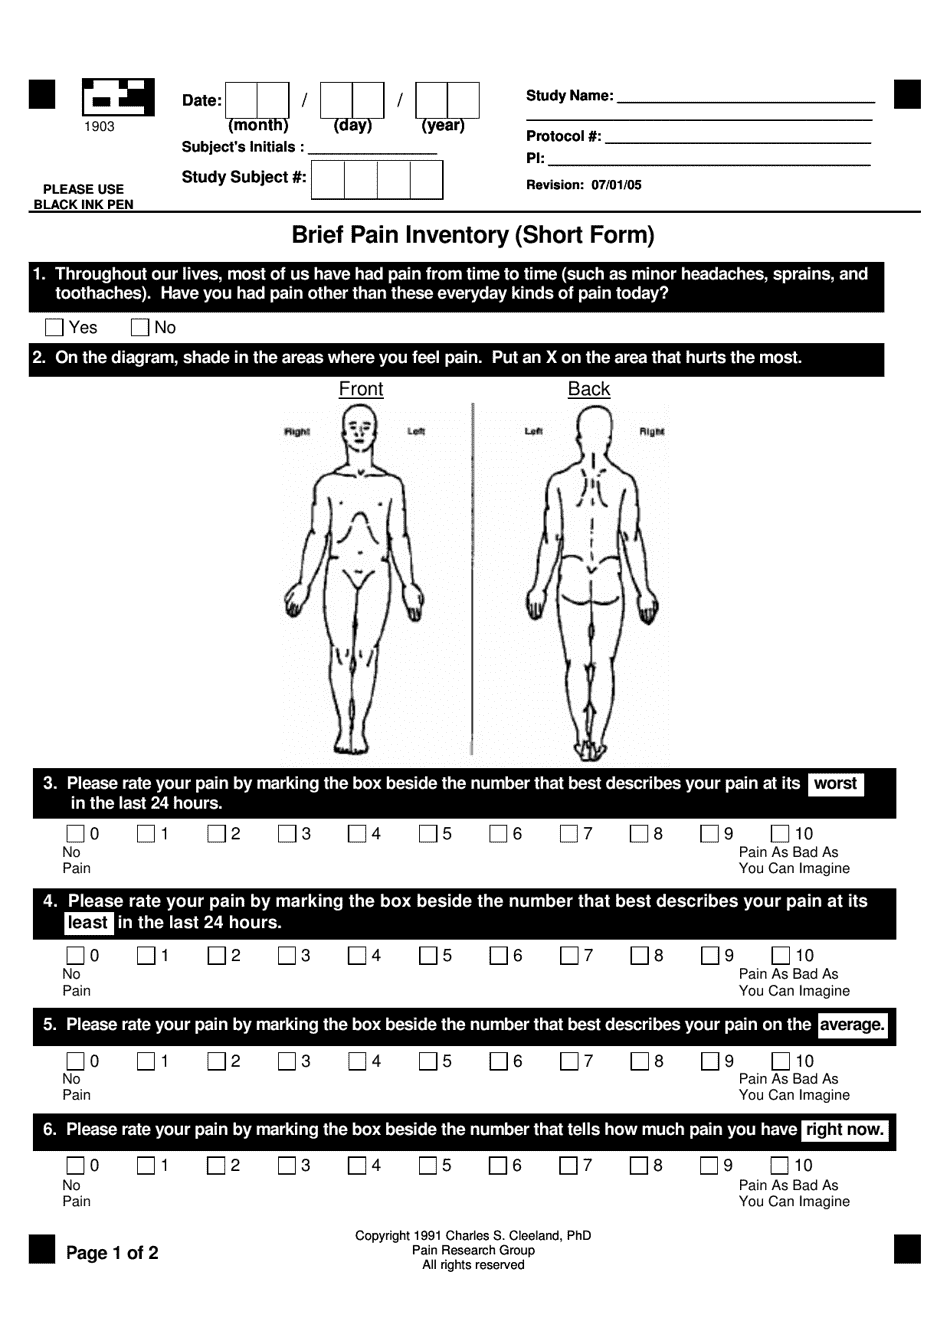 Brief Pain Inventory (Short Form) - Charles S. Cleeland, Page 1